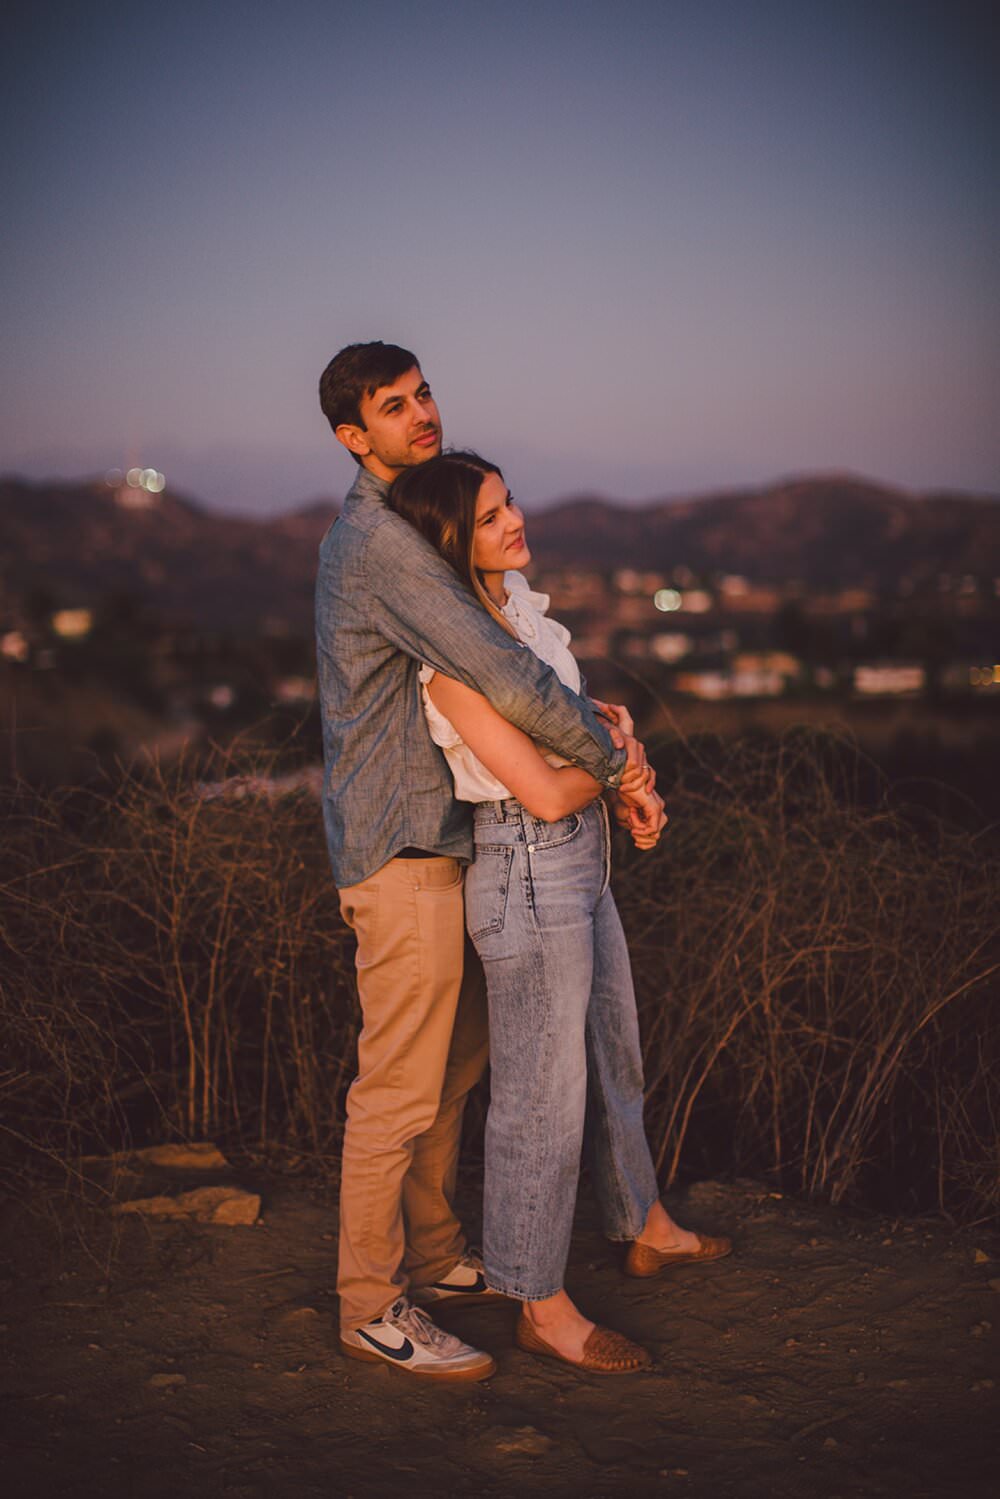  los angeles elopement, hollywood wedding locations, california elopement, los angeles elopement locations, how to elope in los angeles, adventure session, adventure elopement, adventure session outfit, cupcakes and cashmere, los angeles elopement photographer, sustainable fashion, lifestyle blogger, los angeles proposal ideas, engagement photo ideas, los angeles engagement photos, runyon canyon, los angeles engagement photo locations, sunset elopement photos, engagement photo poses 